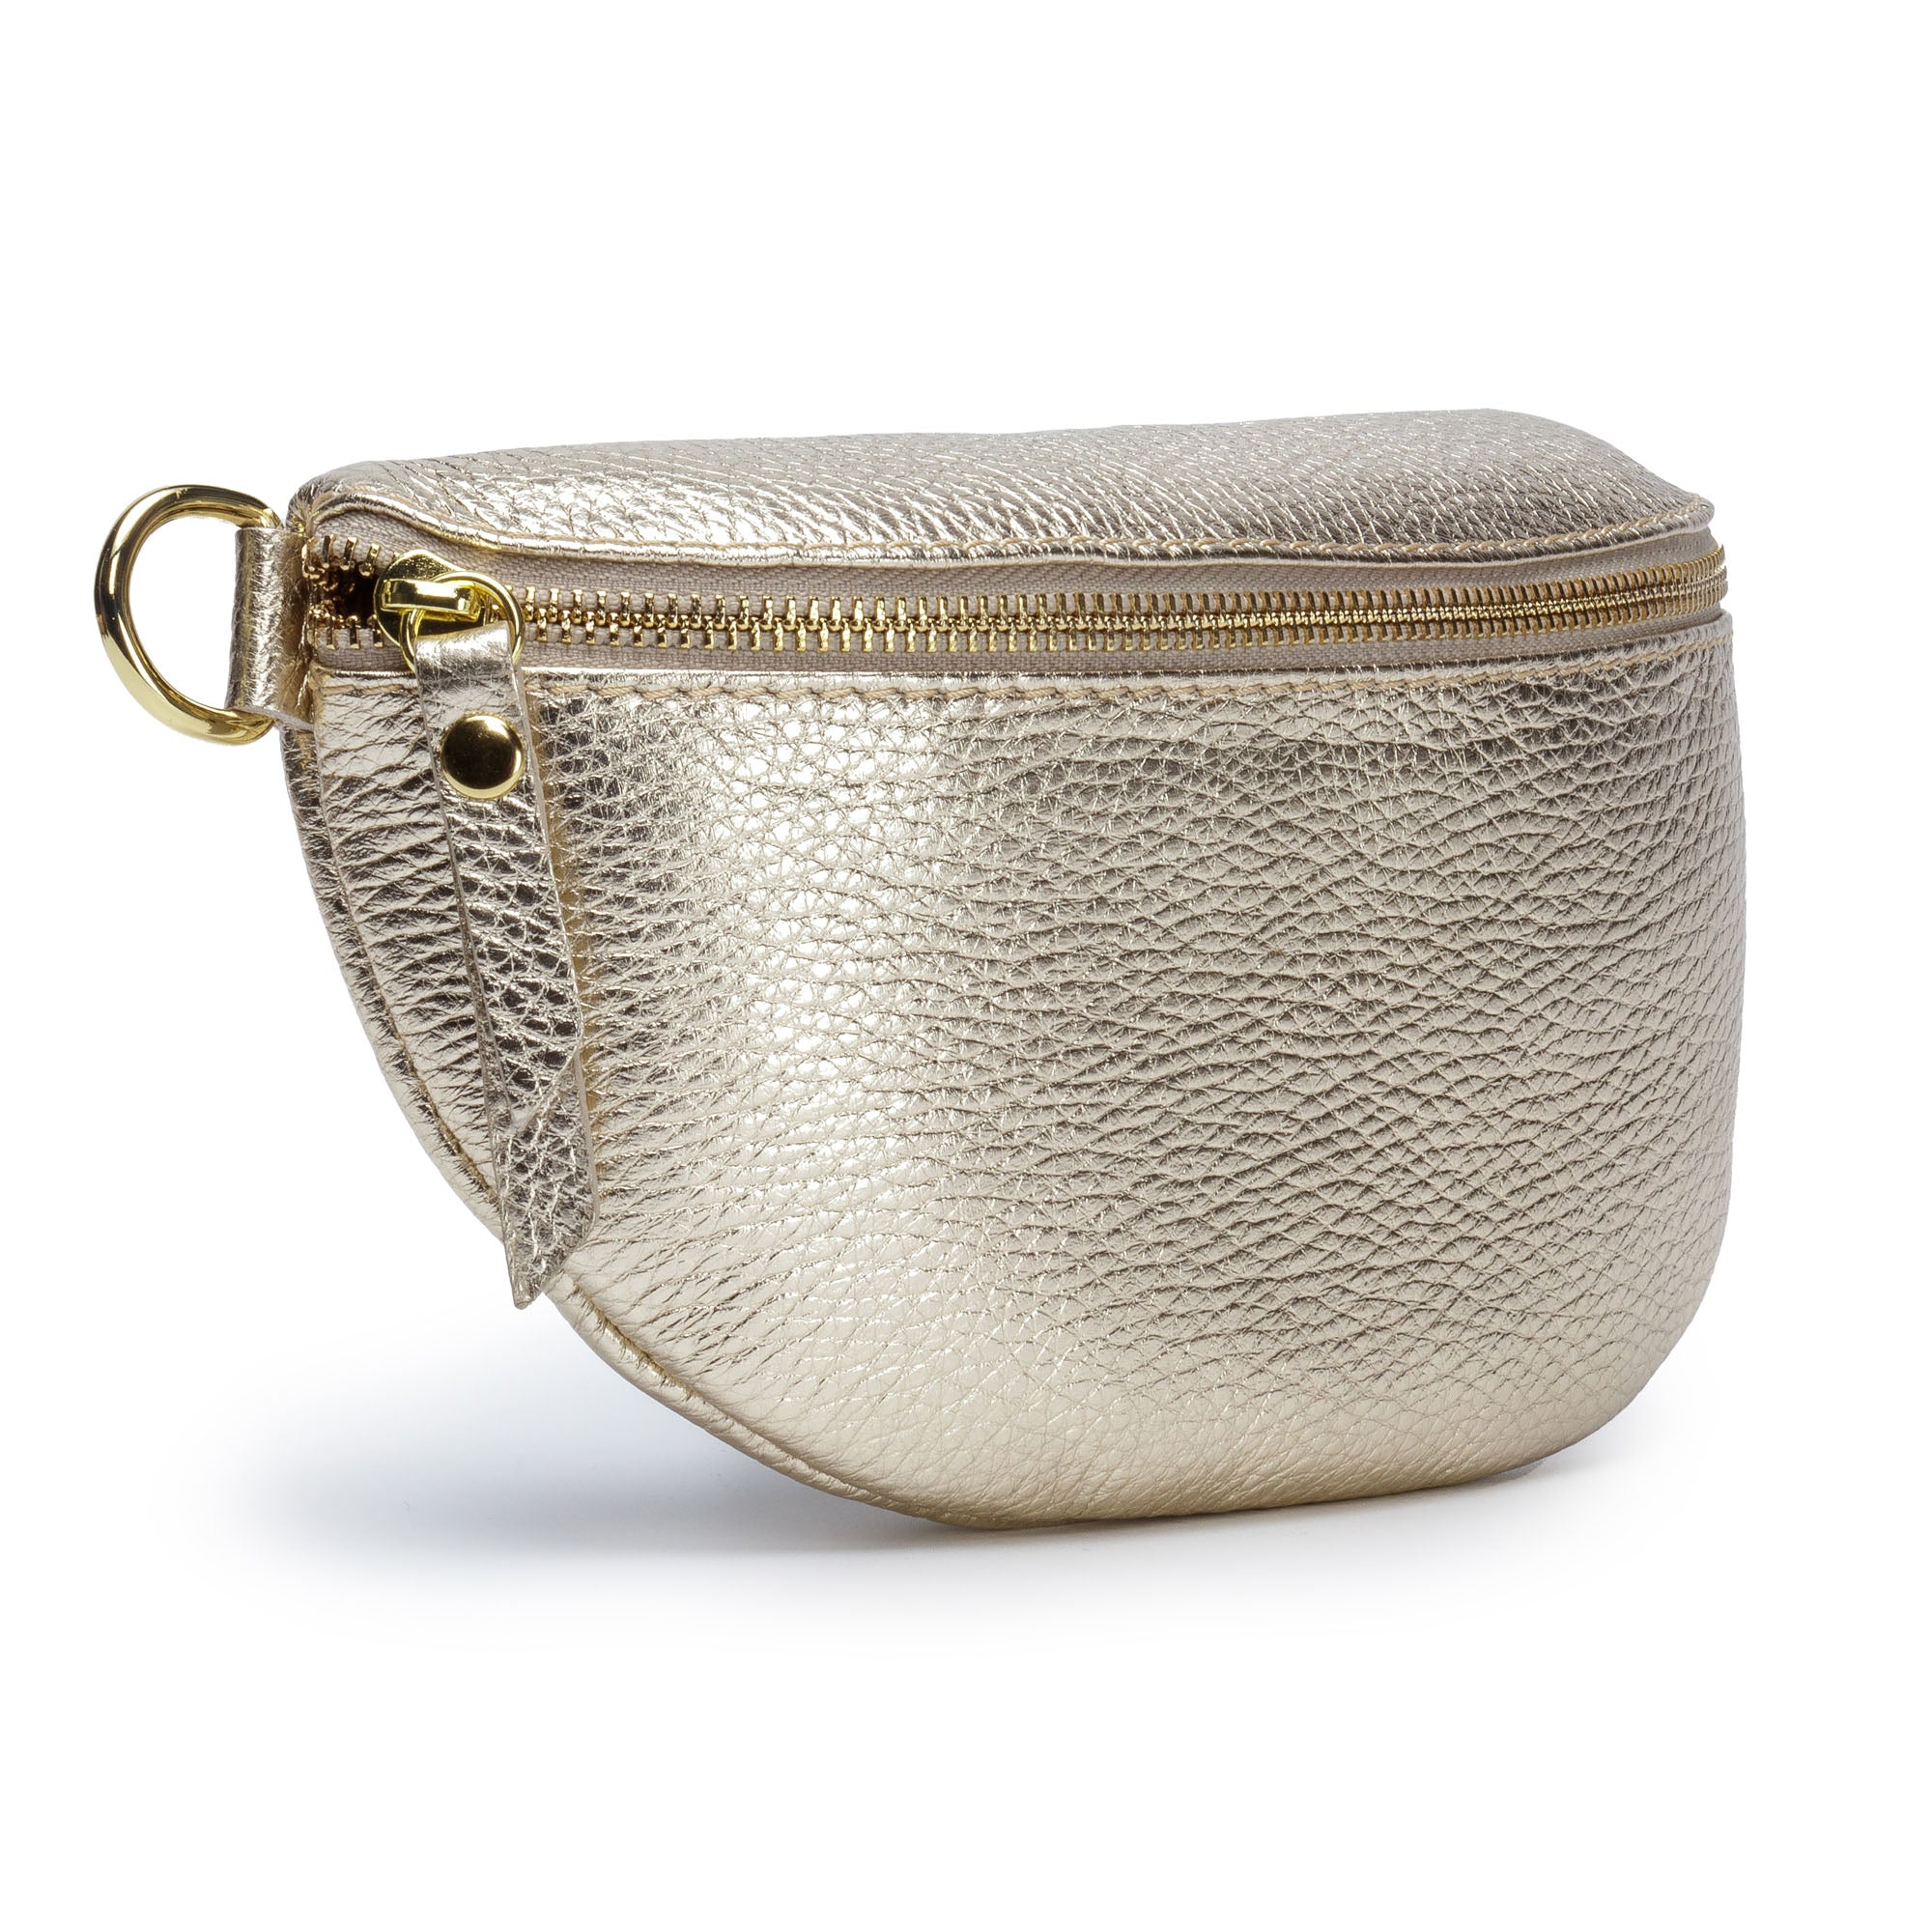 Sling Bag - Gold with Charcoal Strap